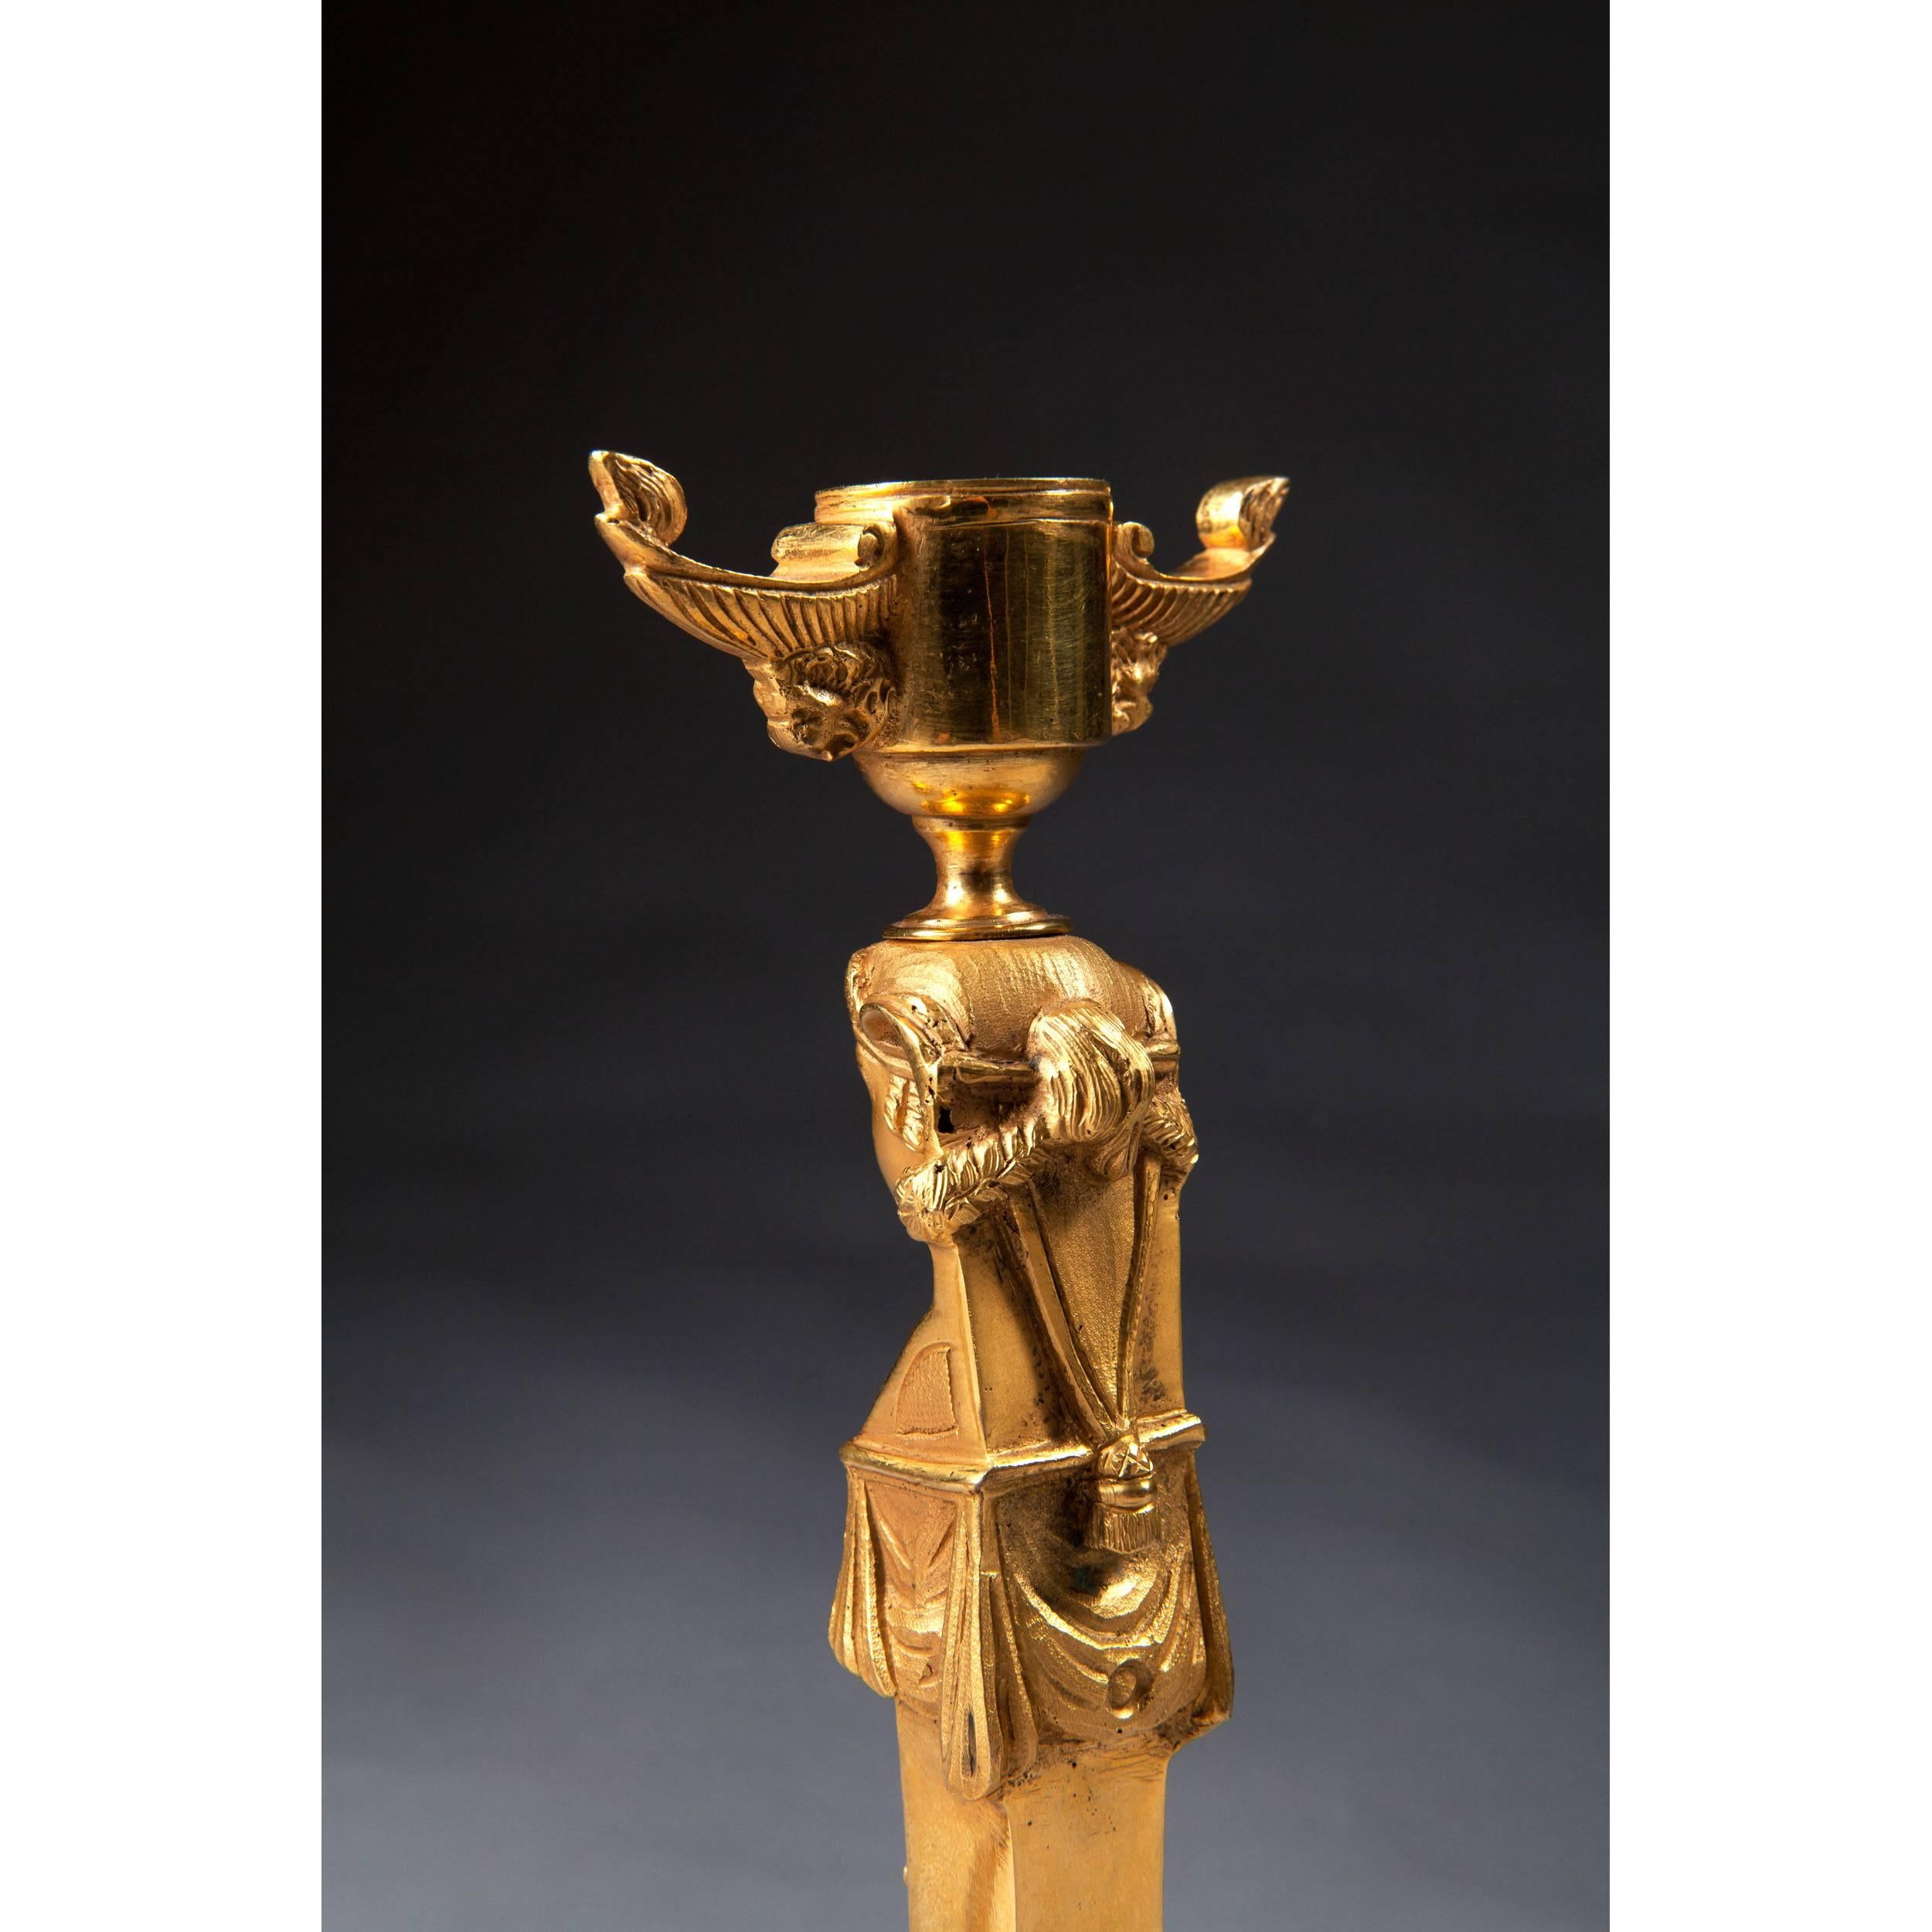 A fine pair of gilt bronze candlesticks as standing female Egyptian caryatid figures surmounted with gilt bronze handled nozzles with lion masks, the candlesticks of tapering form, the front mounted with vase candelabra detailing, each on circular